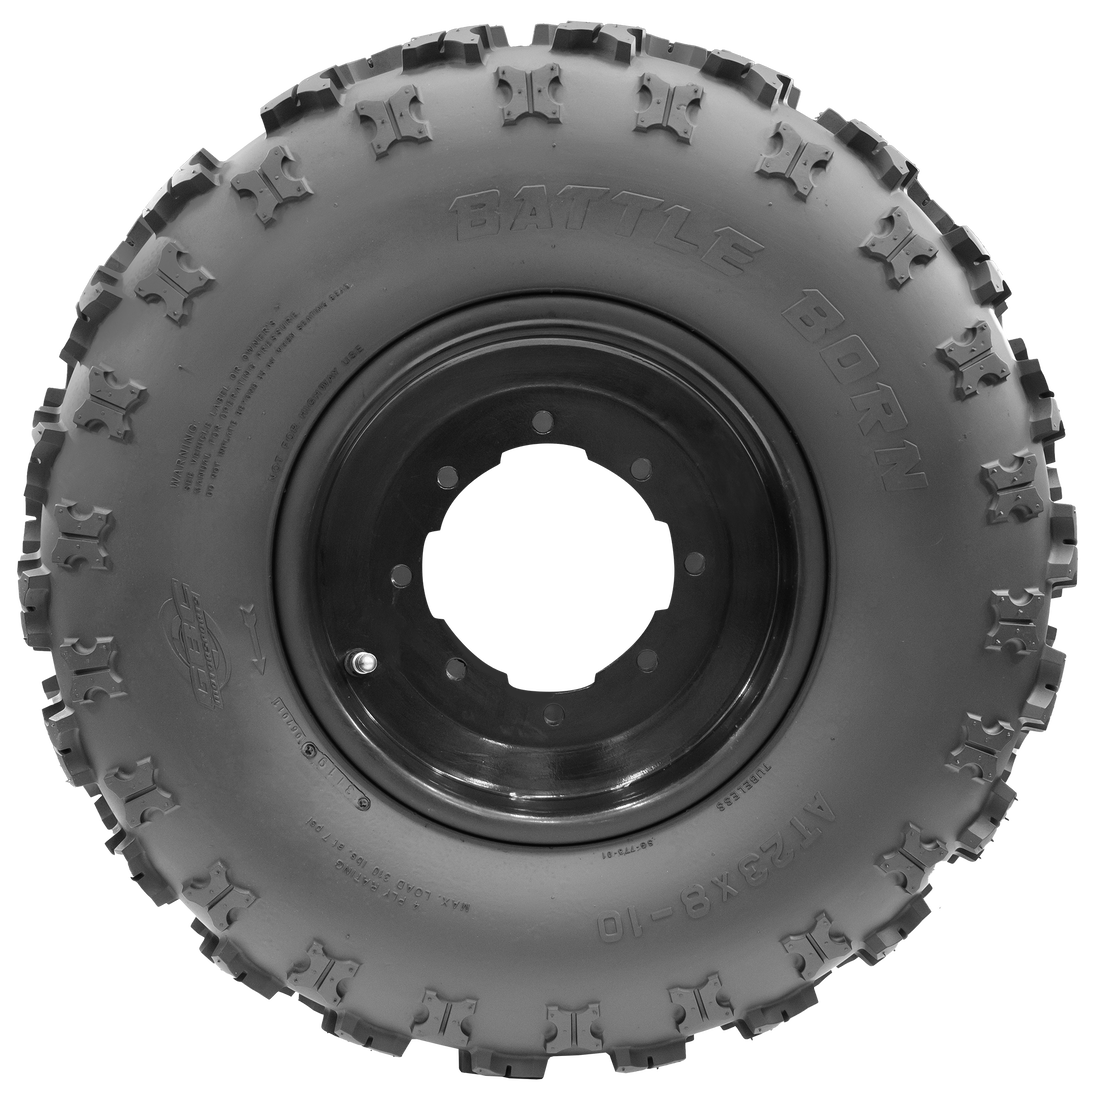 Side view of the Battle Born tire, emphasizing its unique construction. The X-knob design showcases the tire's adaptability for both front and rear setups, with the front tire engineered for precision handling and control.